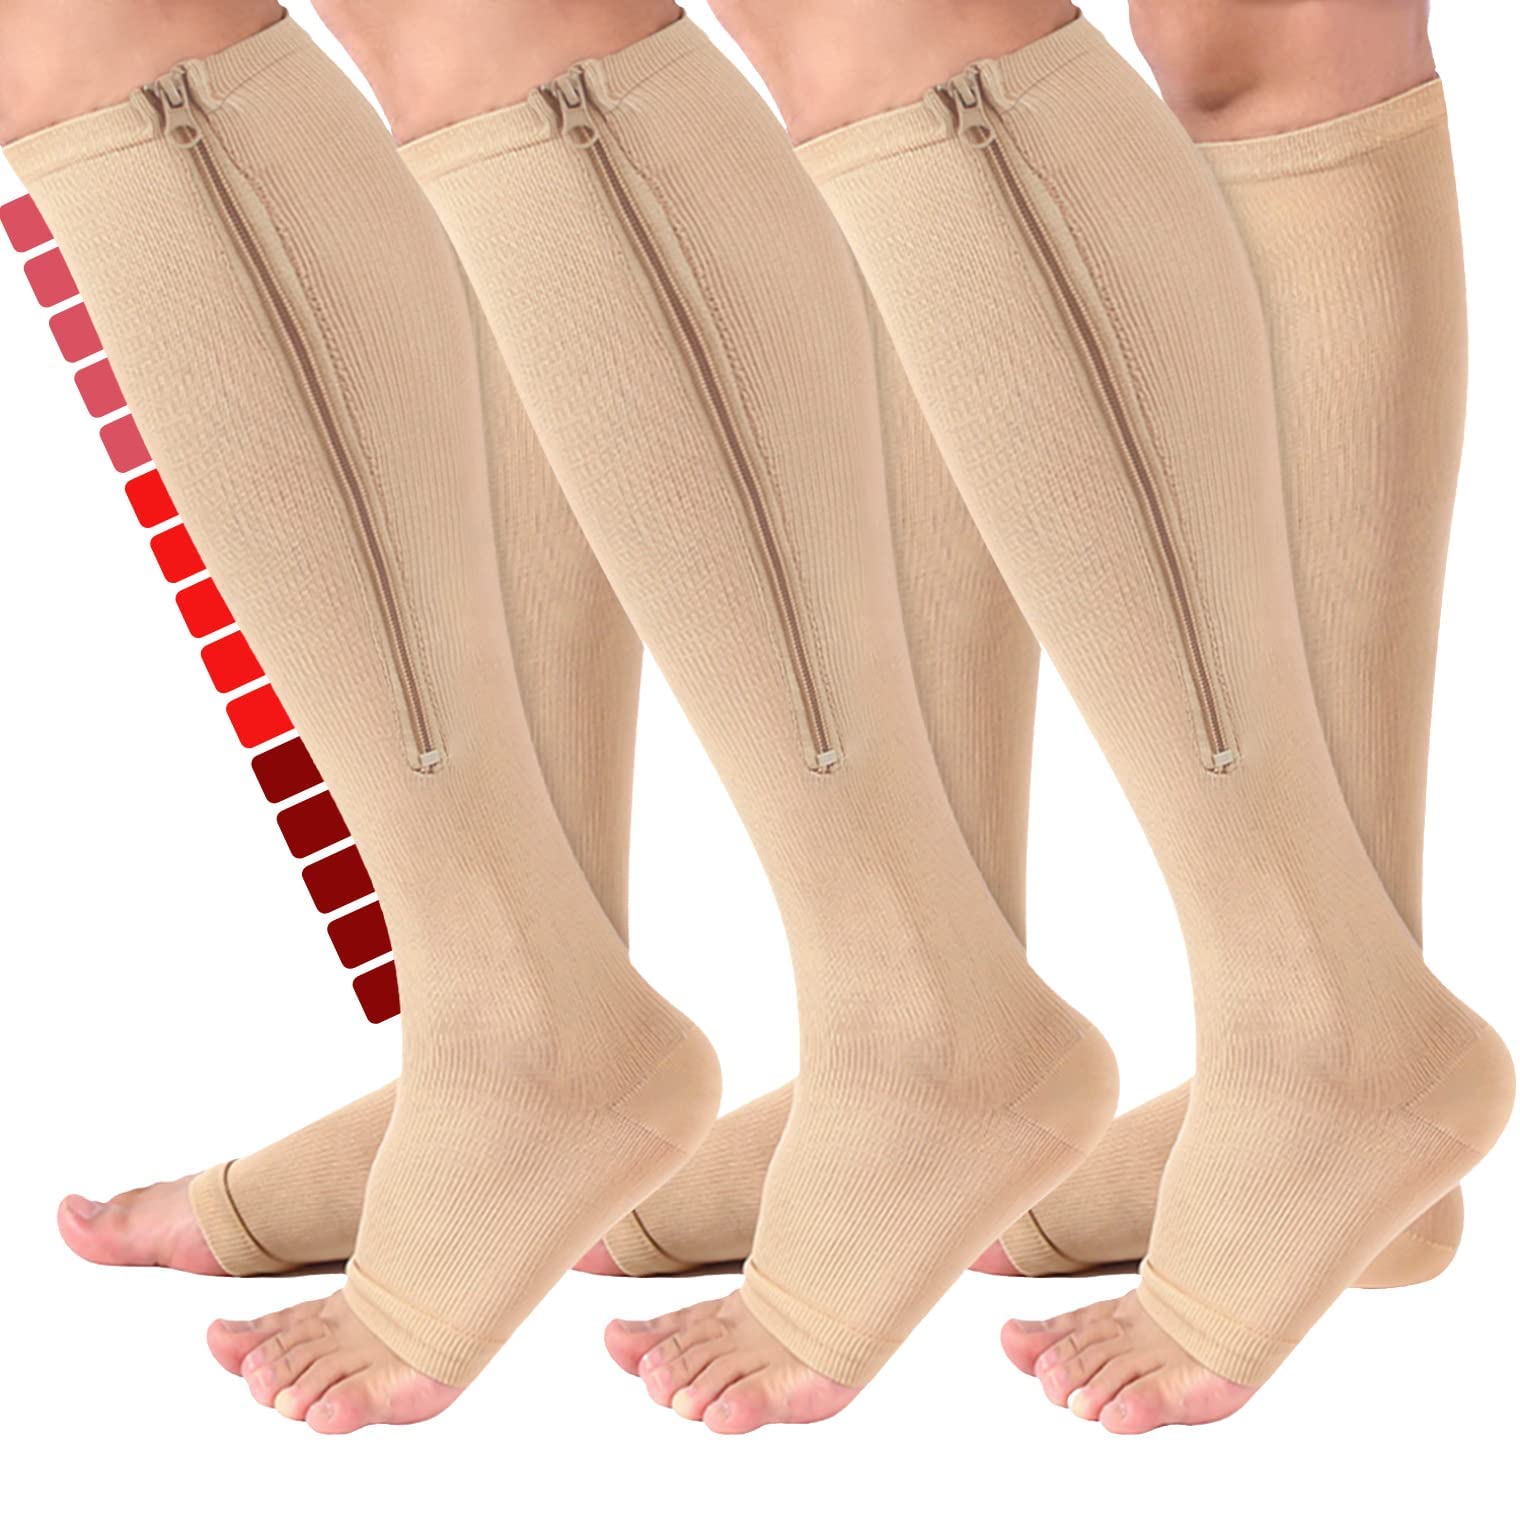 Zipper Compression Socks Calf Knee High Stocking Open Toe Compression Socks  For Walking Runnng Hiking And Sports Use